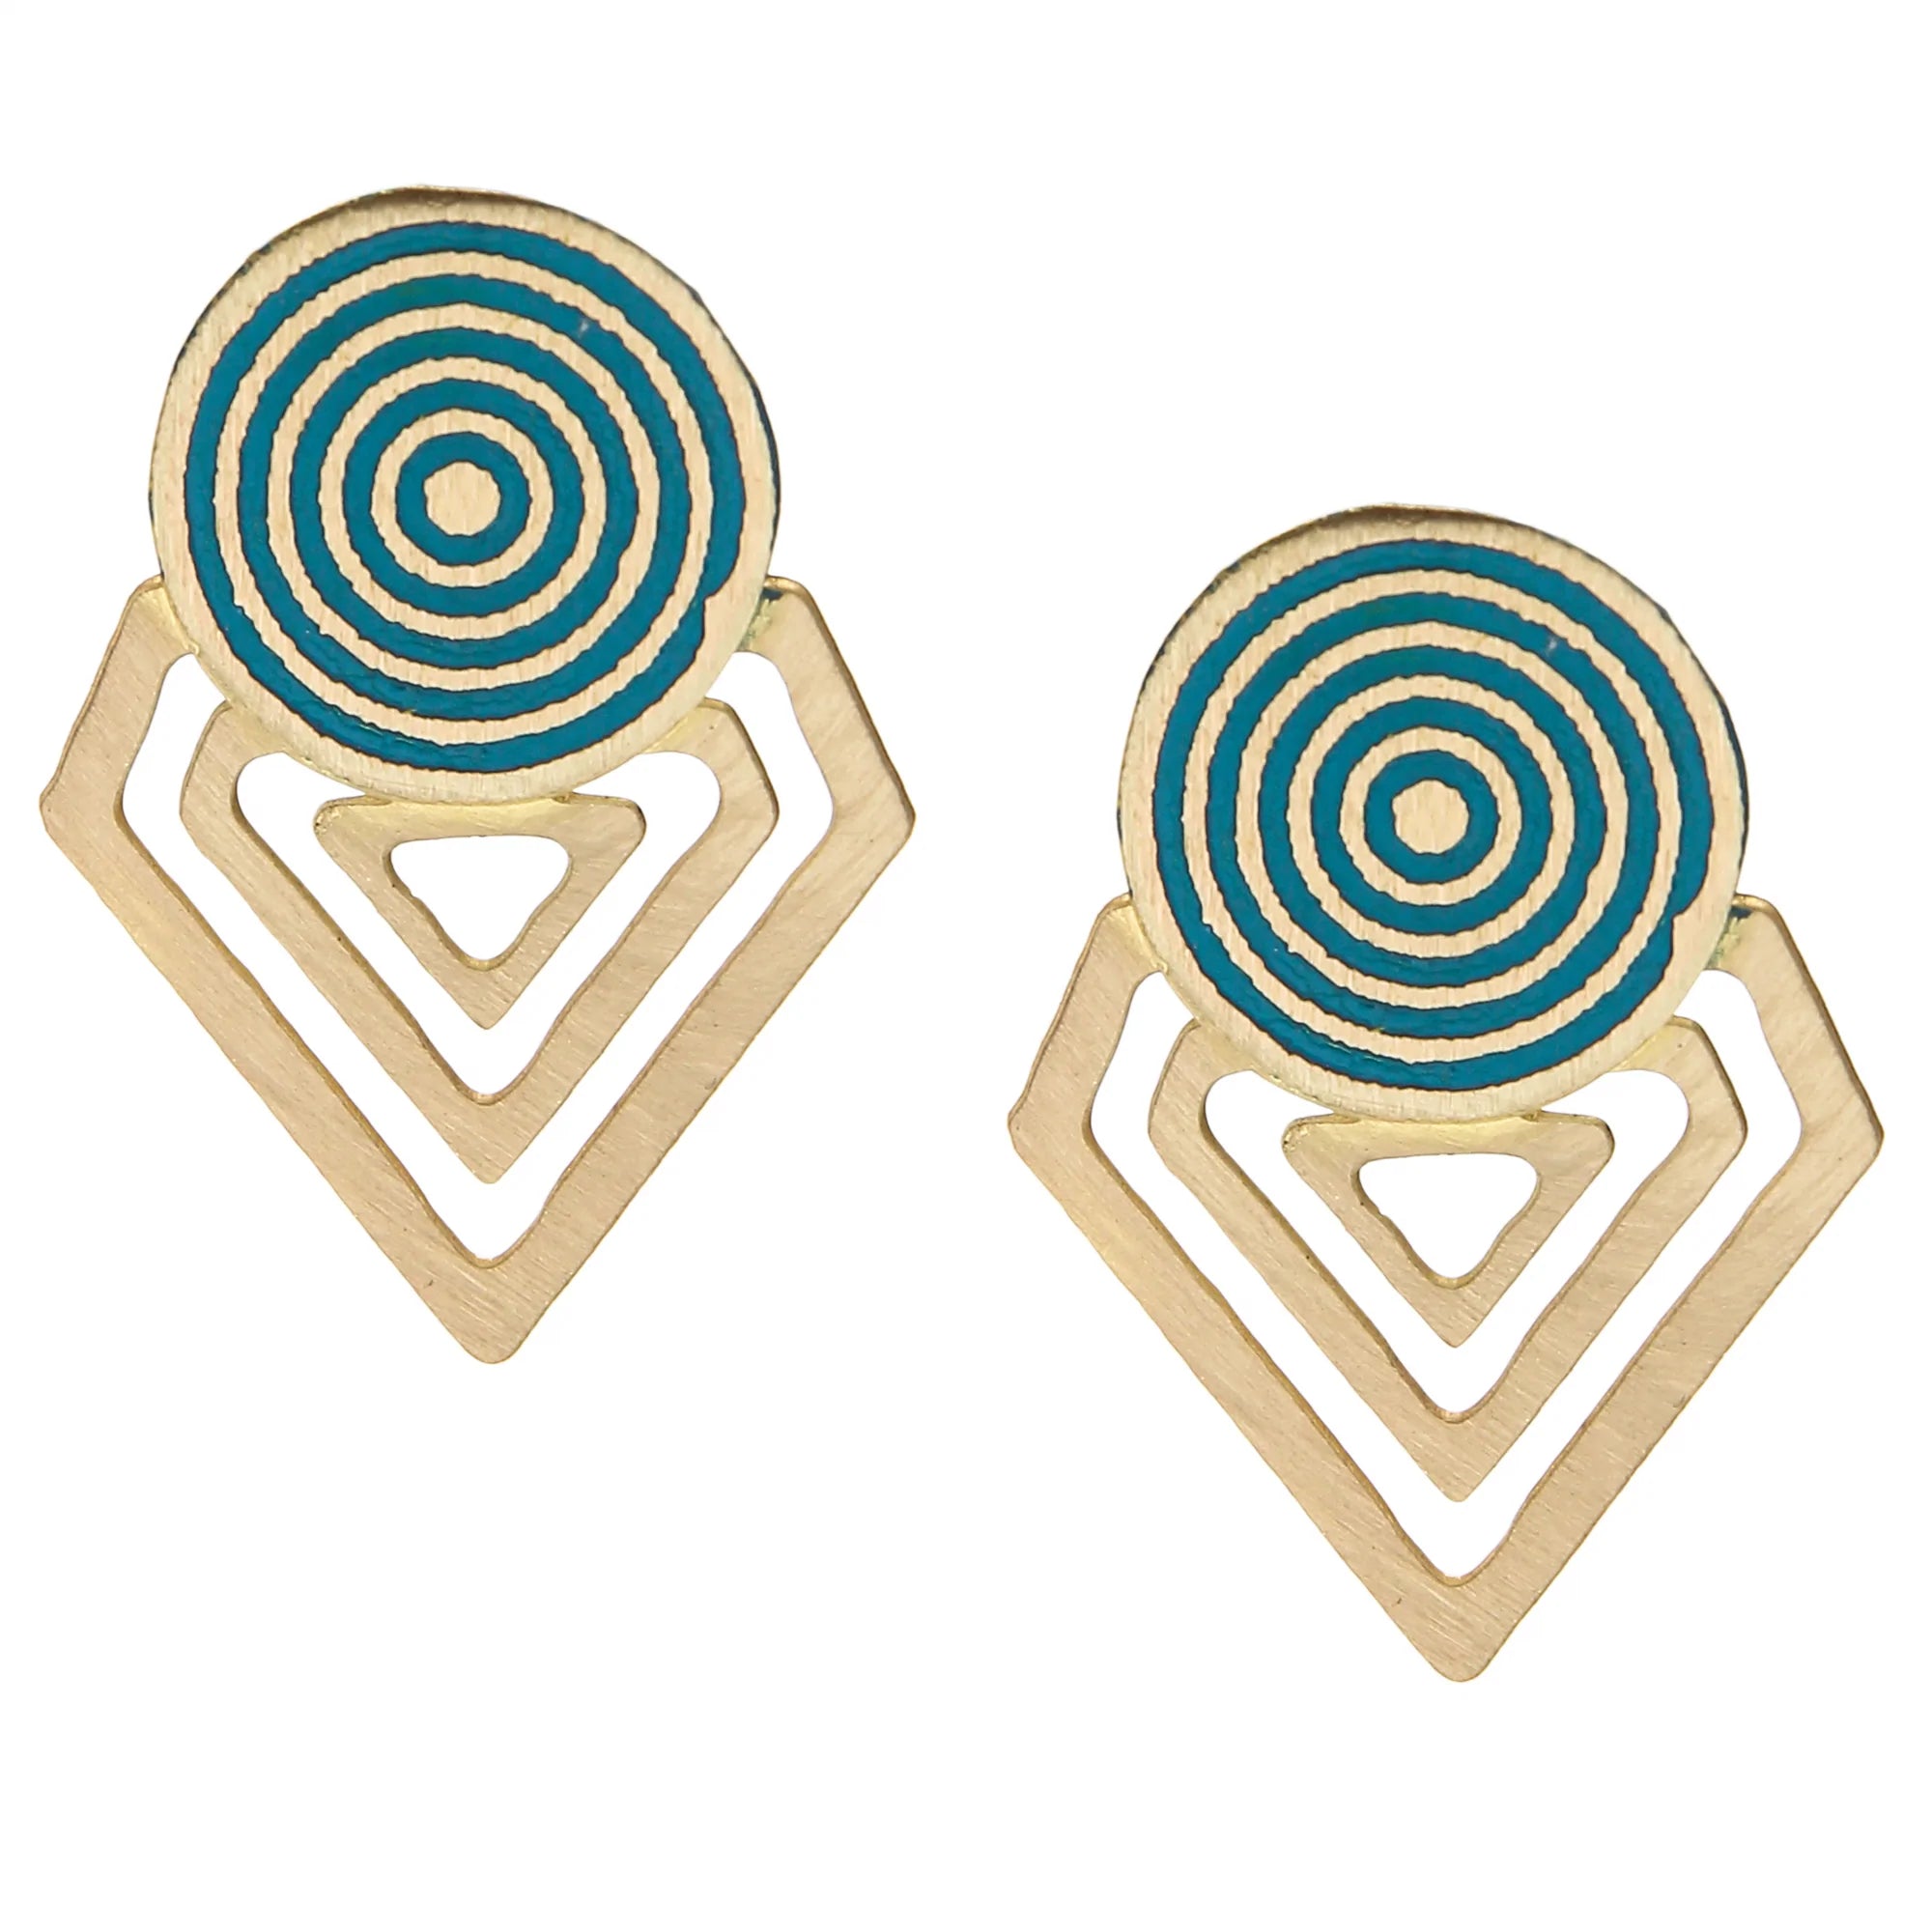 A pair of earrings with a circle shaped target in brass and coppery green with brass diamond shapes attached to the lower half.